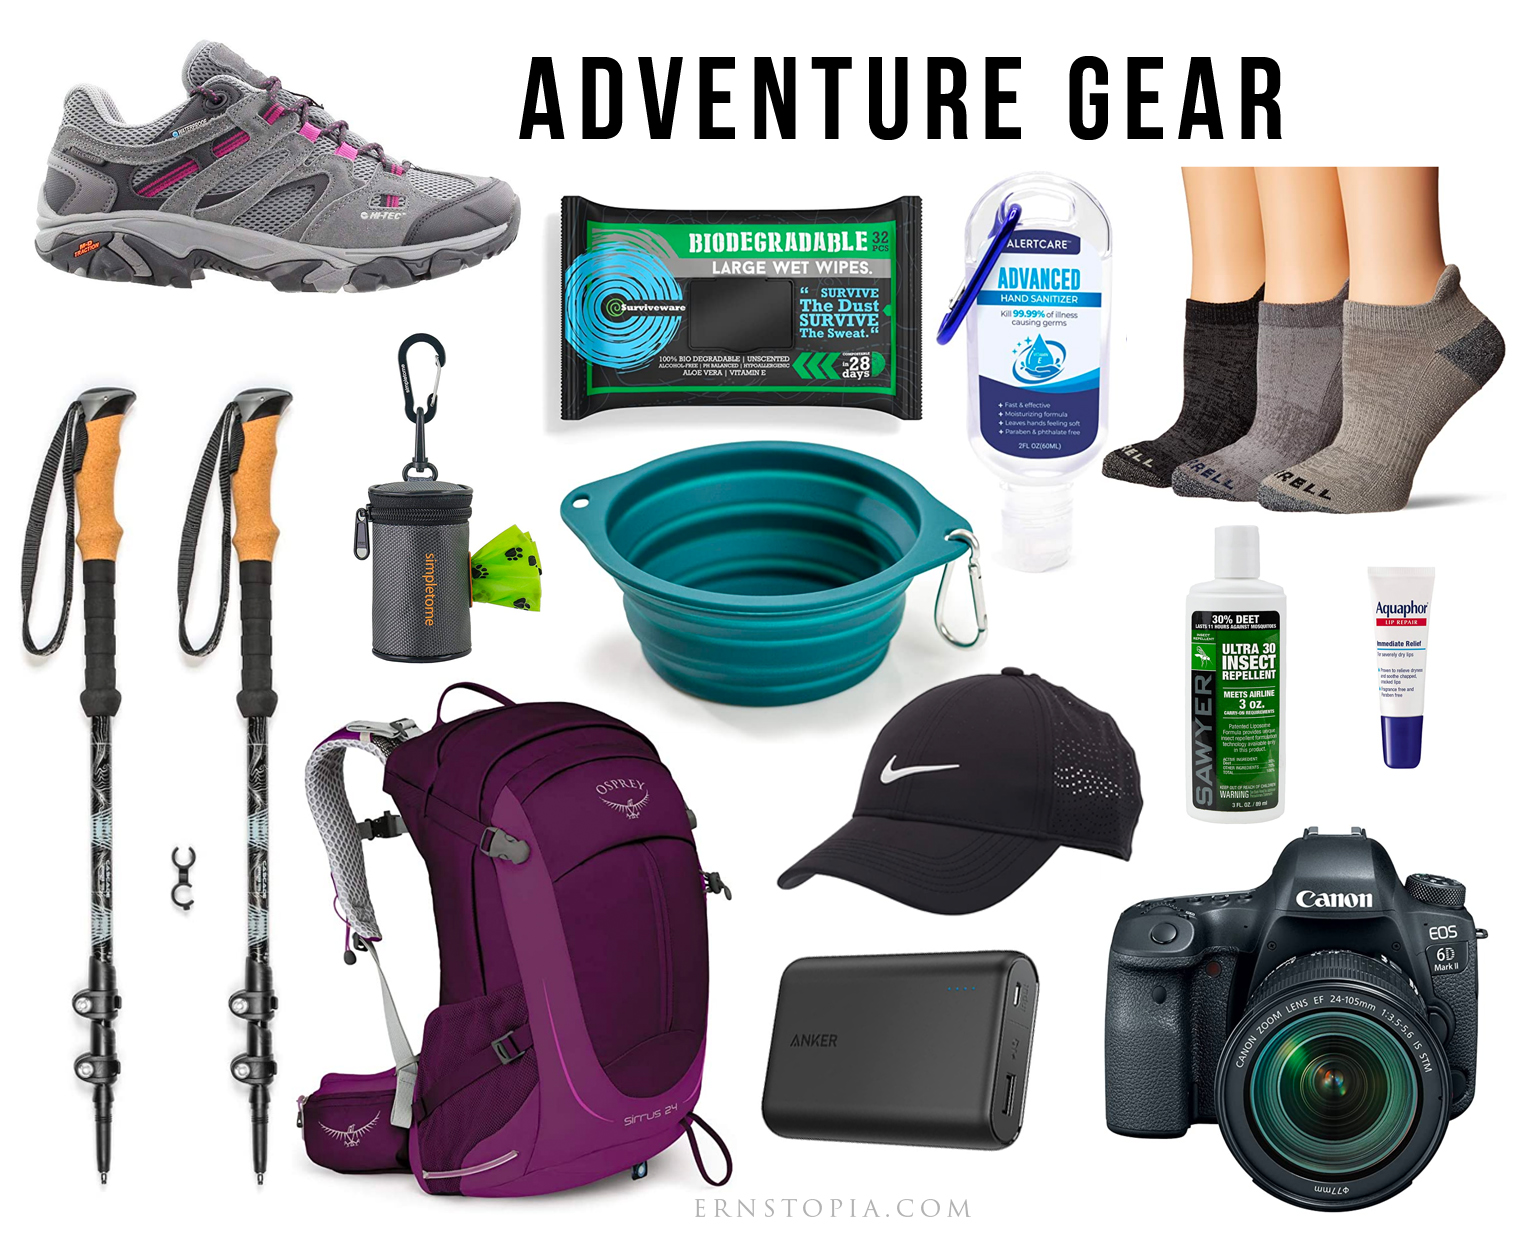 Hiking and camping gear